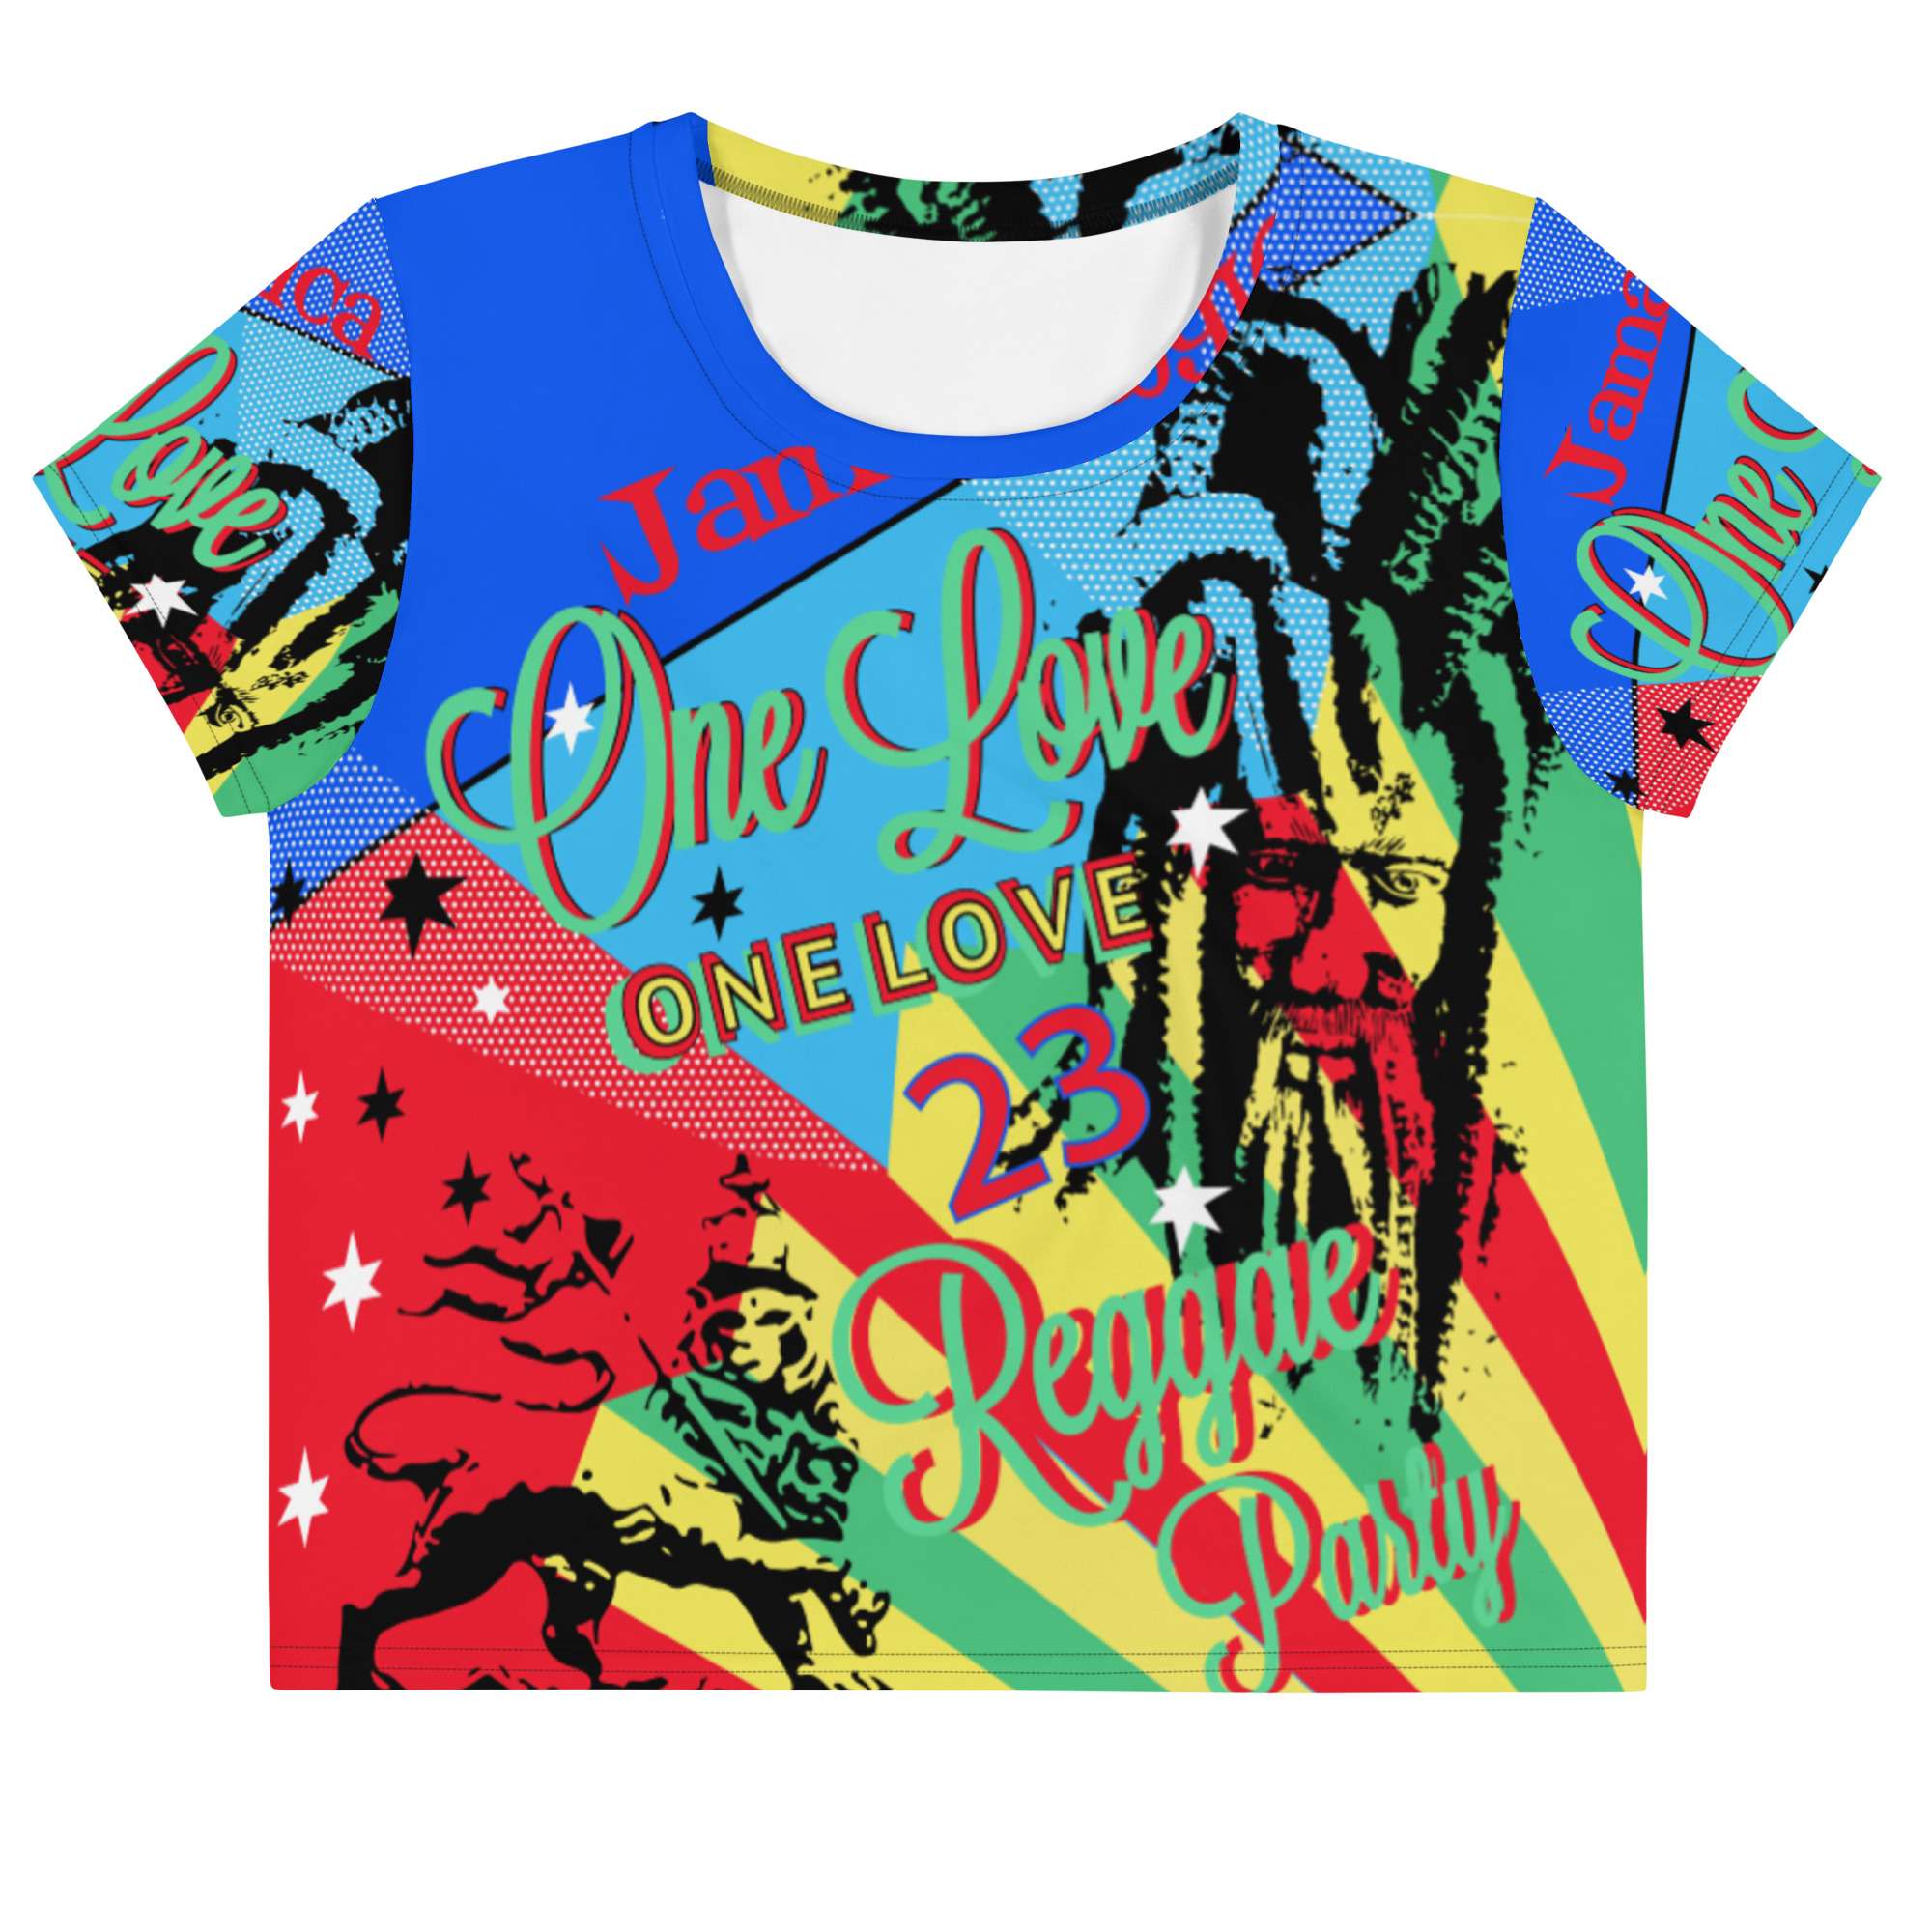 One Love Reggae Party Crop Tee front view in vivid colorful print. Original crop tees, tops, bikinis, swimsuits, skirt, shoes and dresses